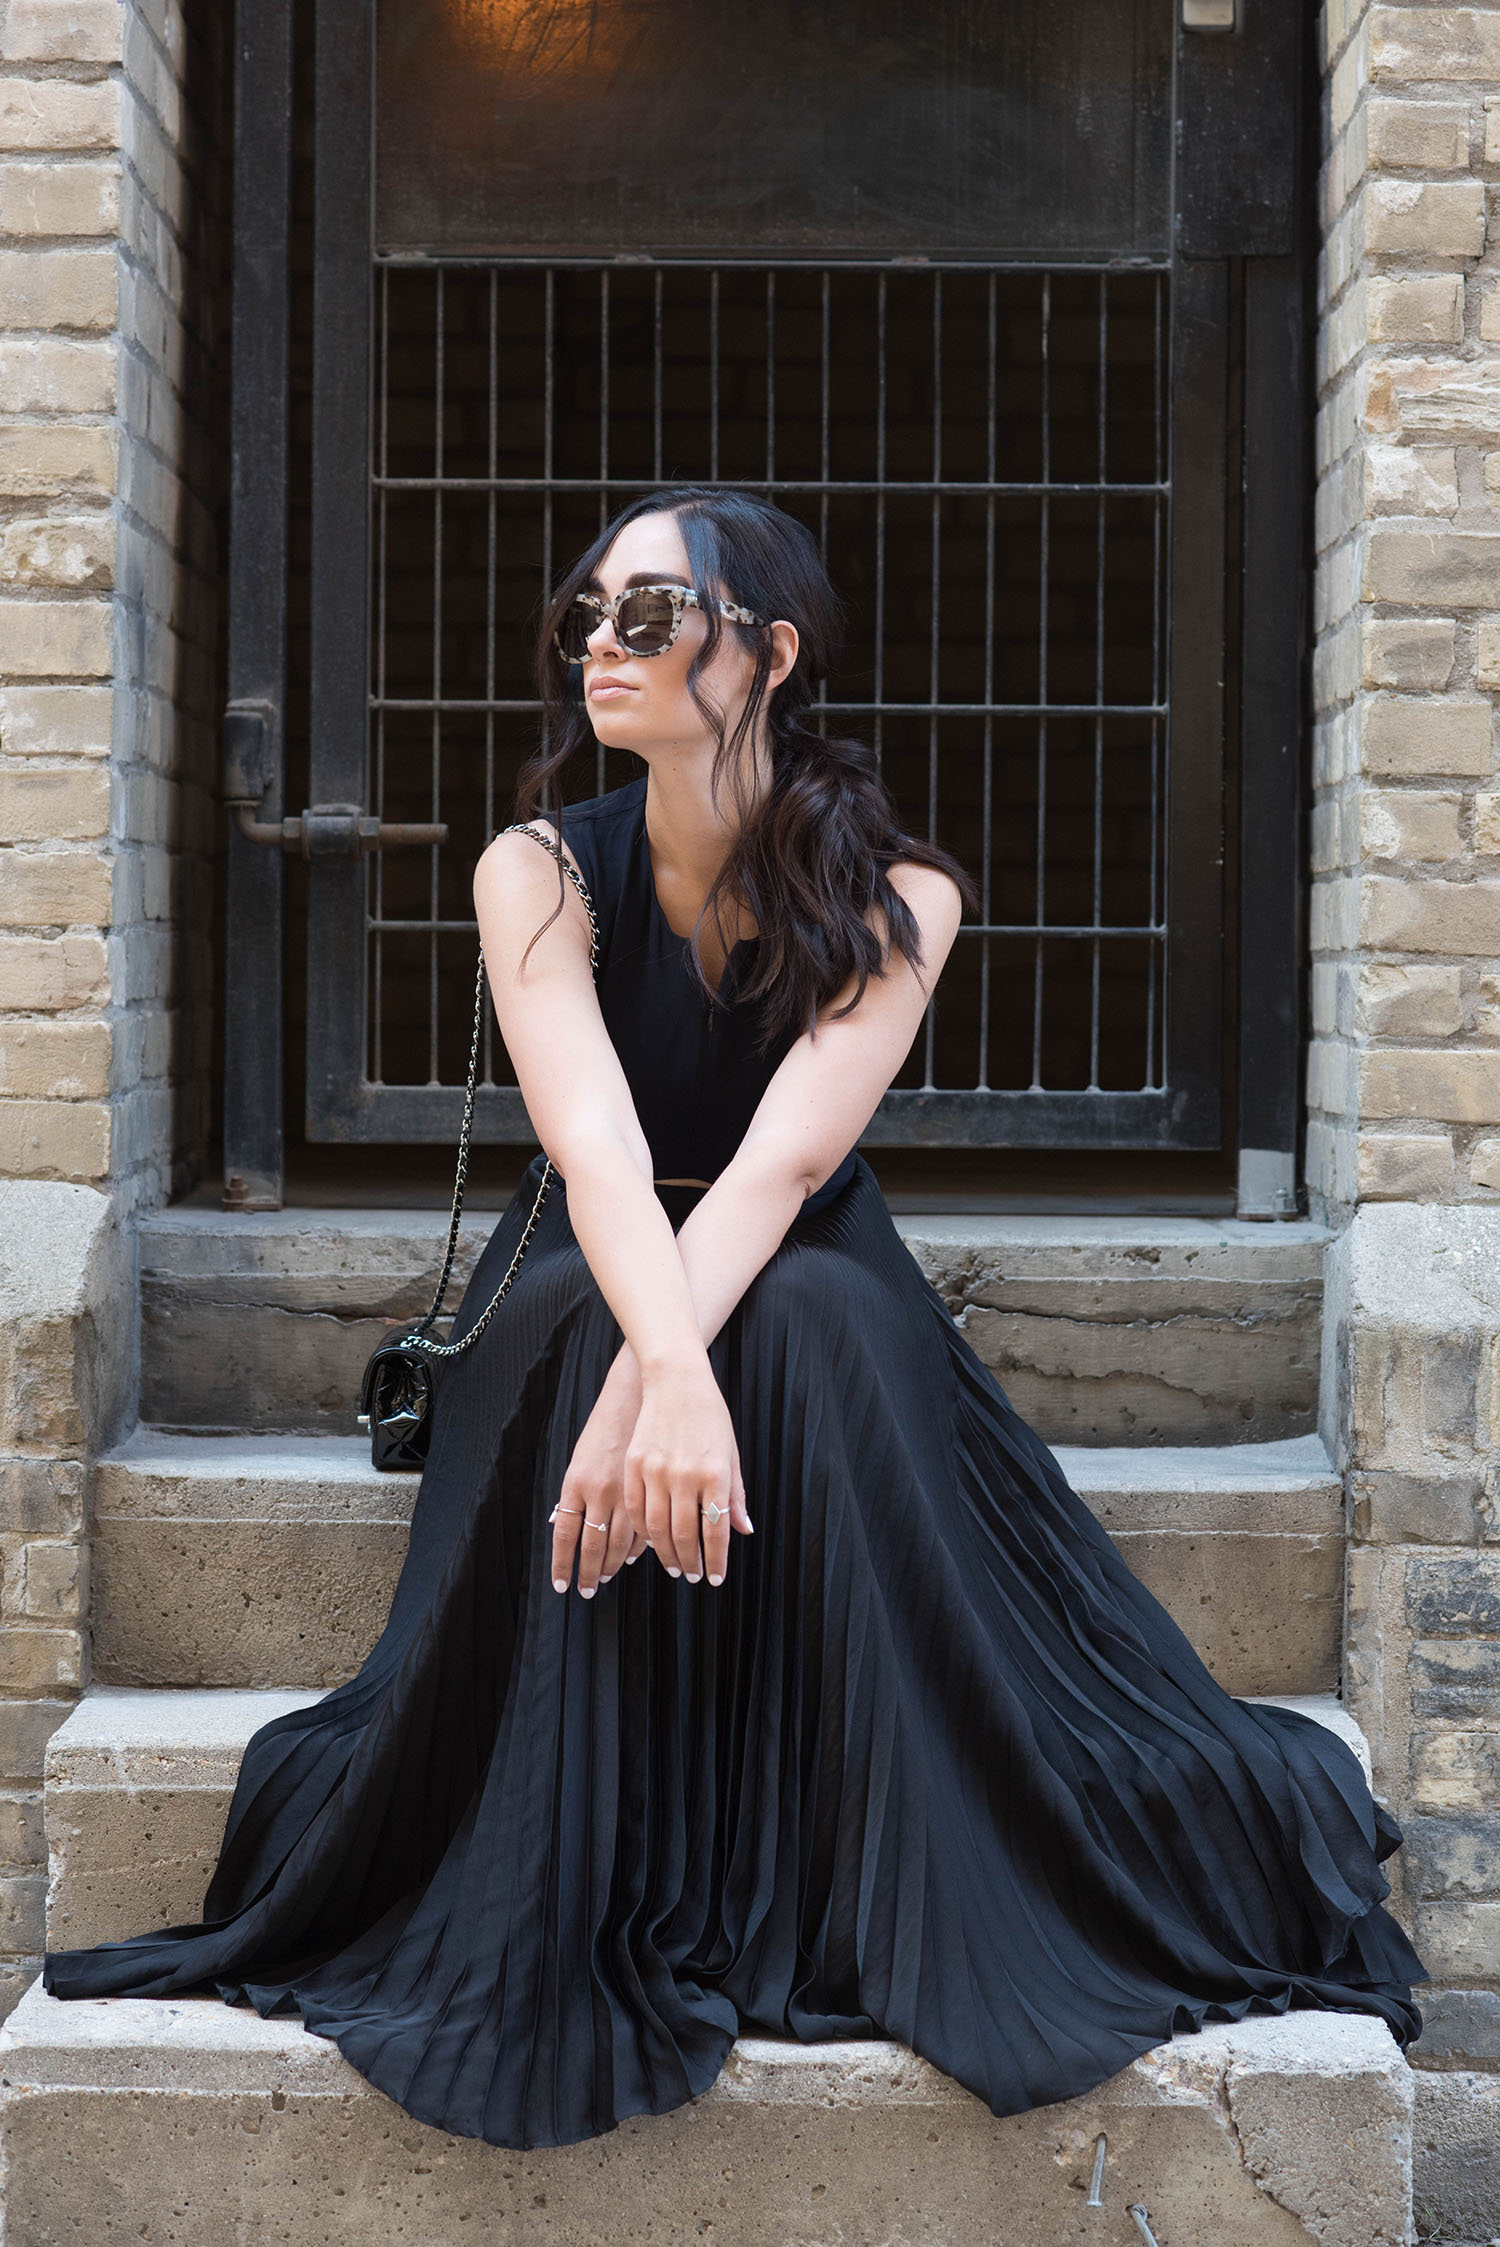 Winnipeg fashion blogger Cee Fardoe of Coco & Vera wears an ALC gown and a ponytail styled by Fran Rizzutto, while carrying a Chanel extra mini handbag